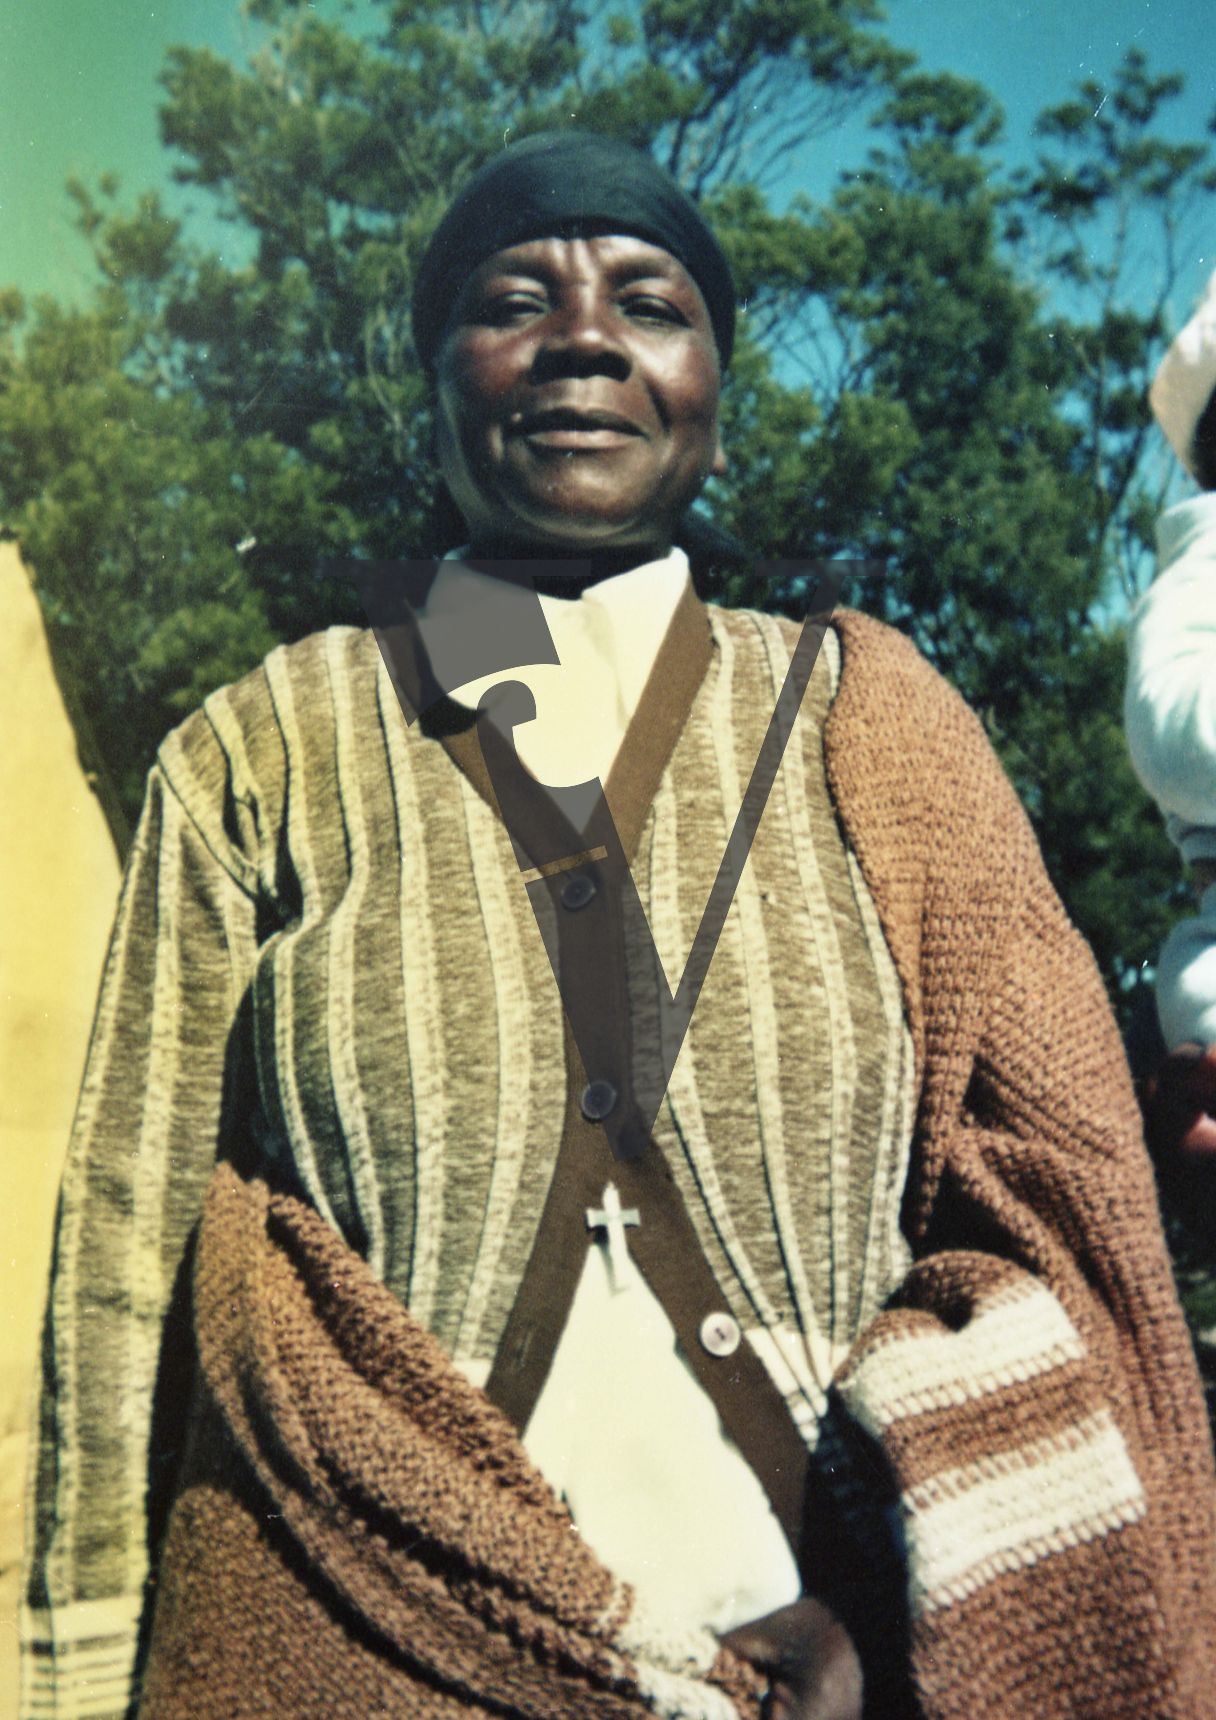 South Africa, Transkei, woman, traditional dress, portrait, mid shot.